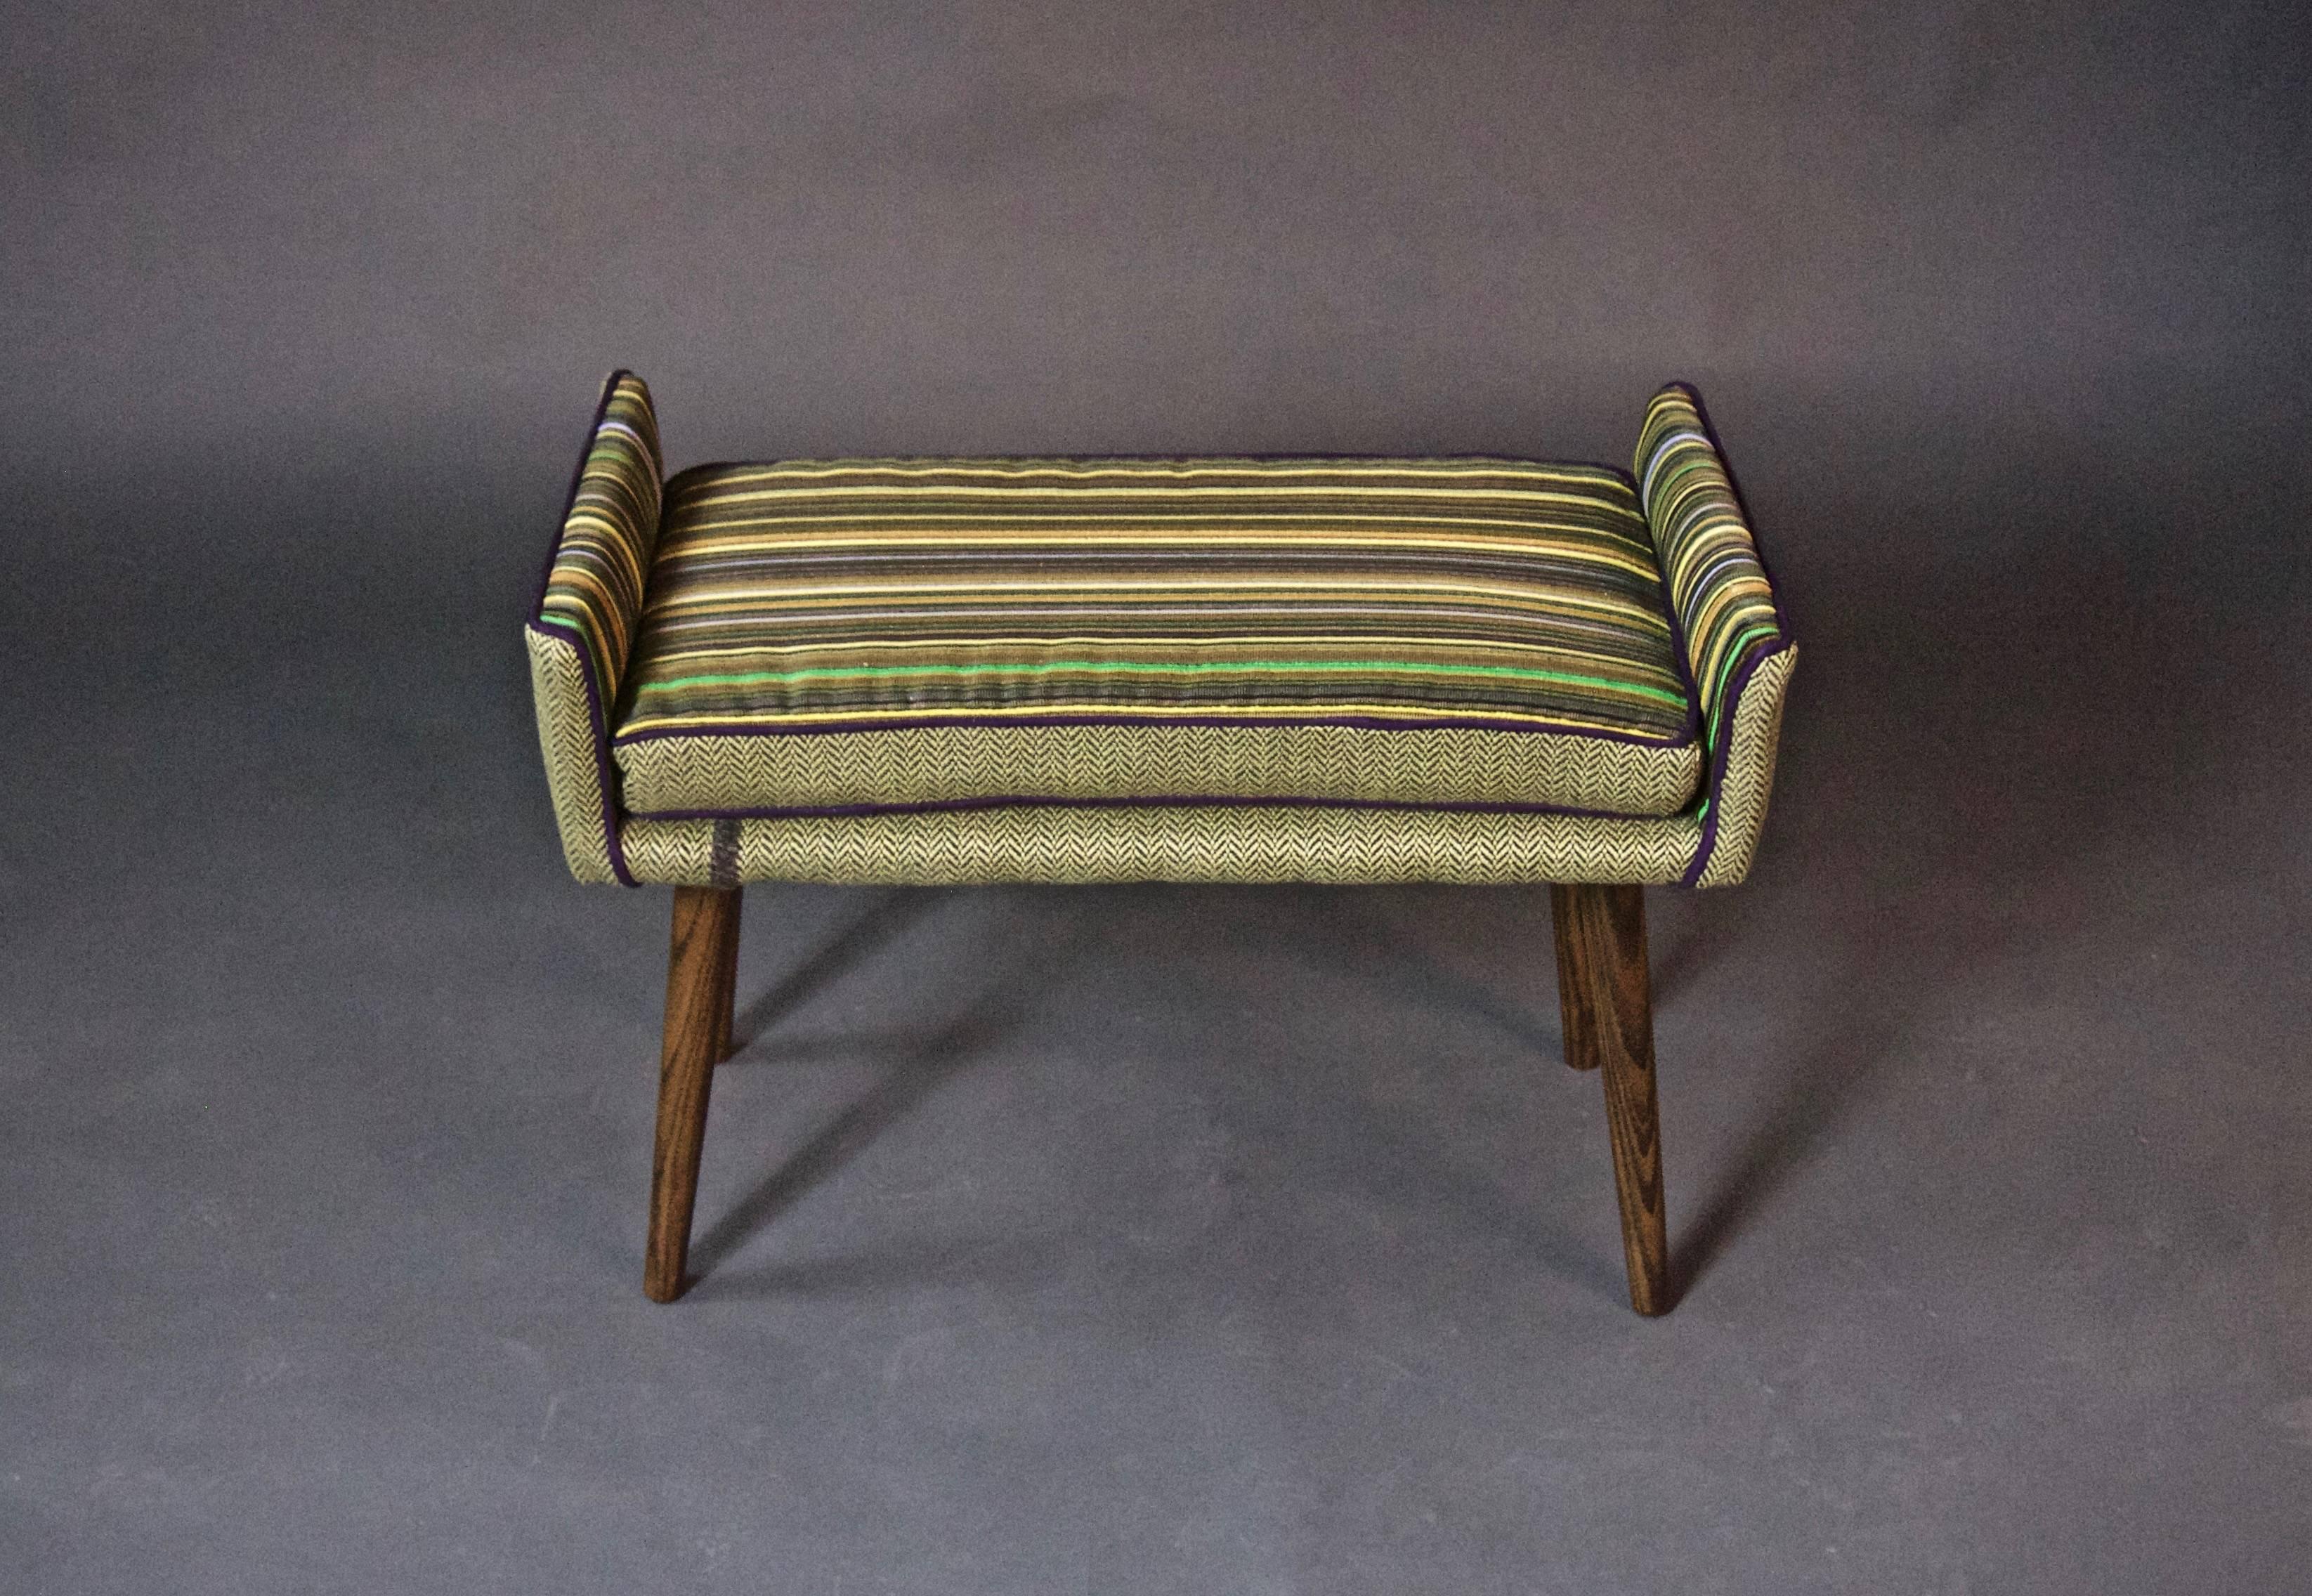 Upholstery Backless Vanity-Sized Stool in Herringbone and Stripes (in stock) For Sale